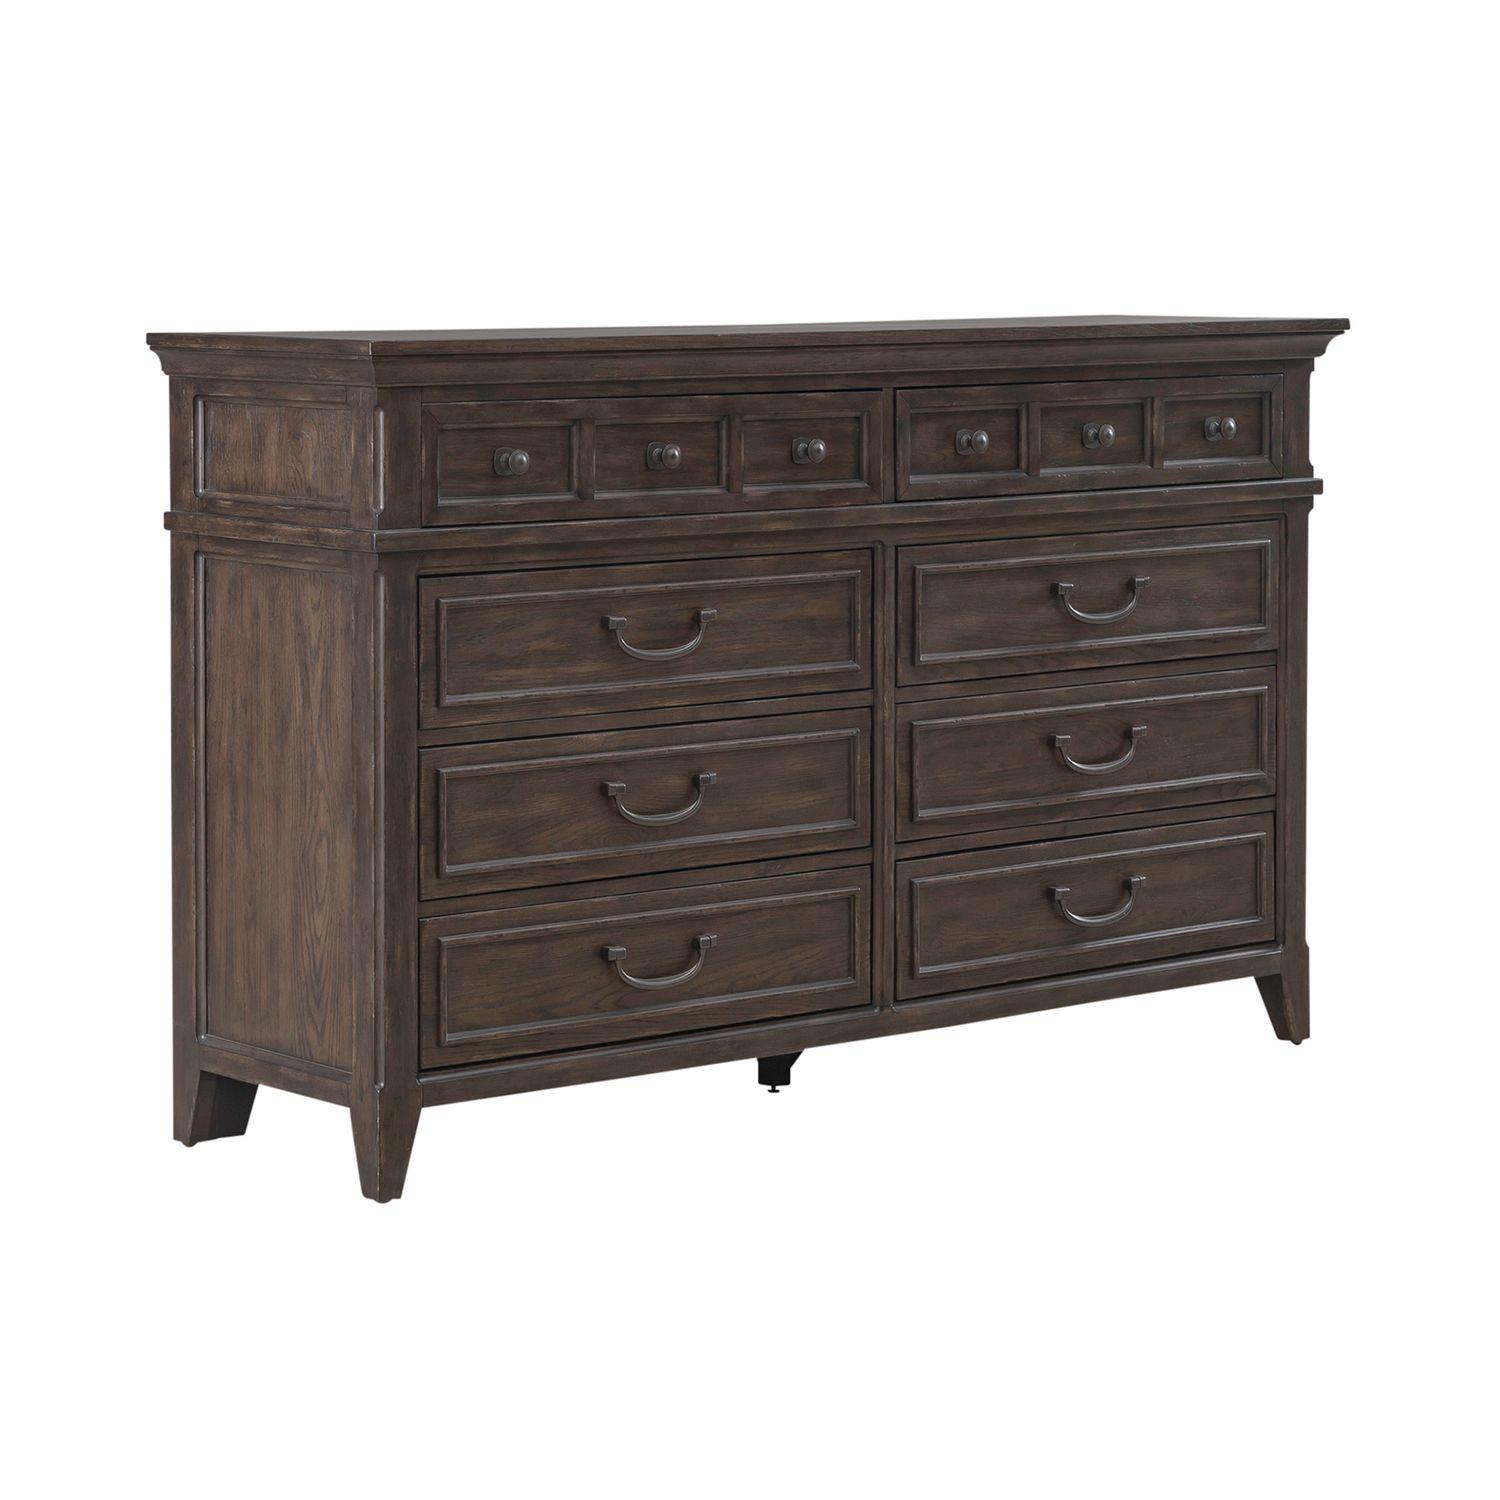 Transitional Double Dresser Paradise Valley (297-BR) 297-BR31 in Brown 